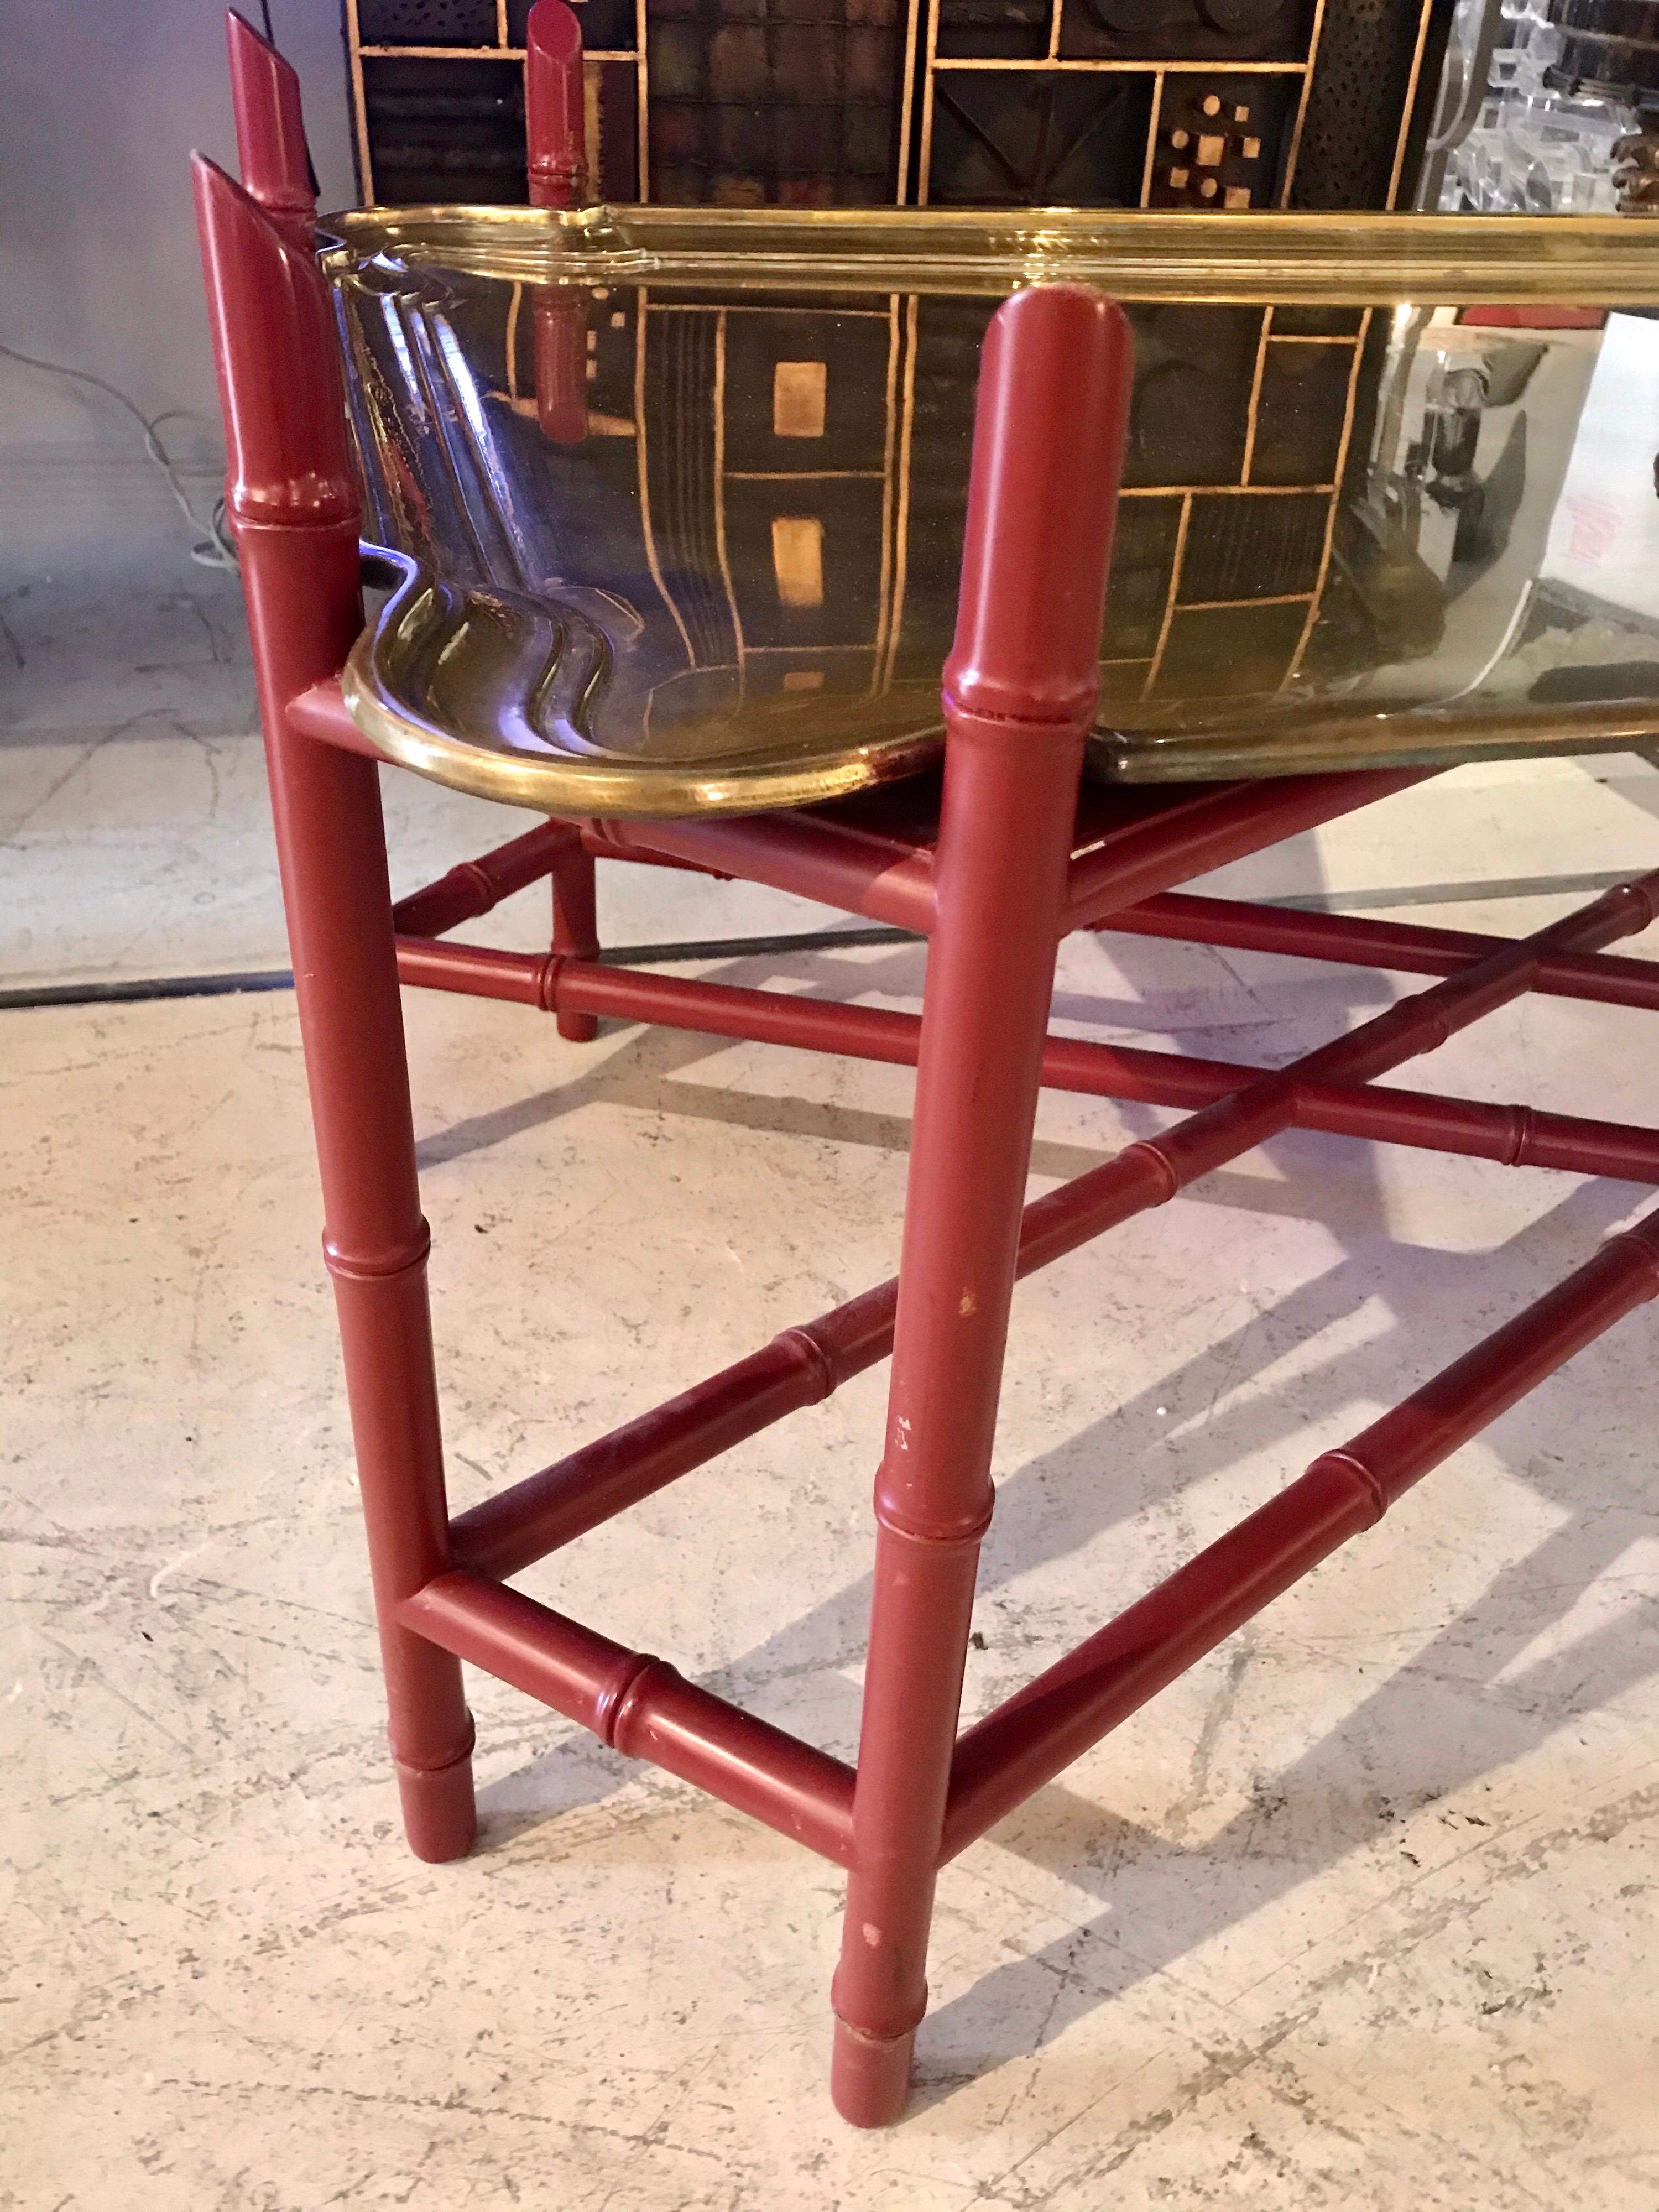 Rich looking transitional coffee table having a heavy super high quality (1/2 inch thick) brass scalloped rectangular tray and handsome faux bamboo red lacquered base. The height to top of the tray is 18 inches. The bamboo frame extends above the